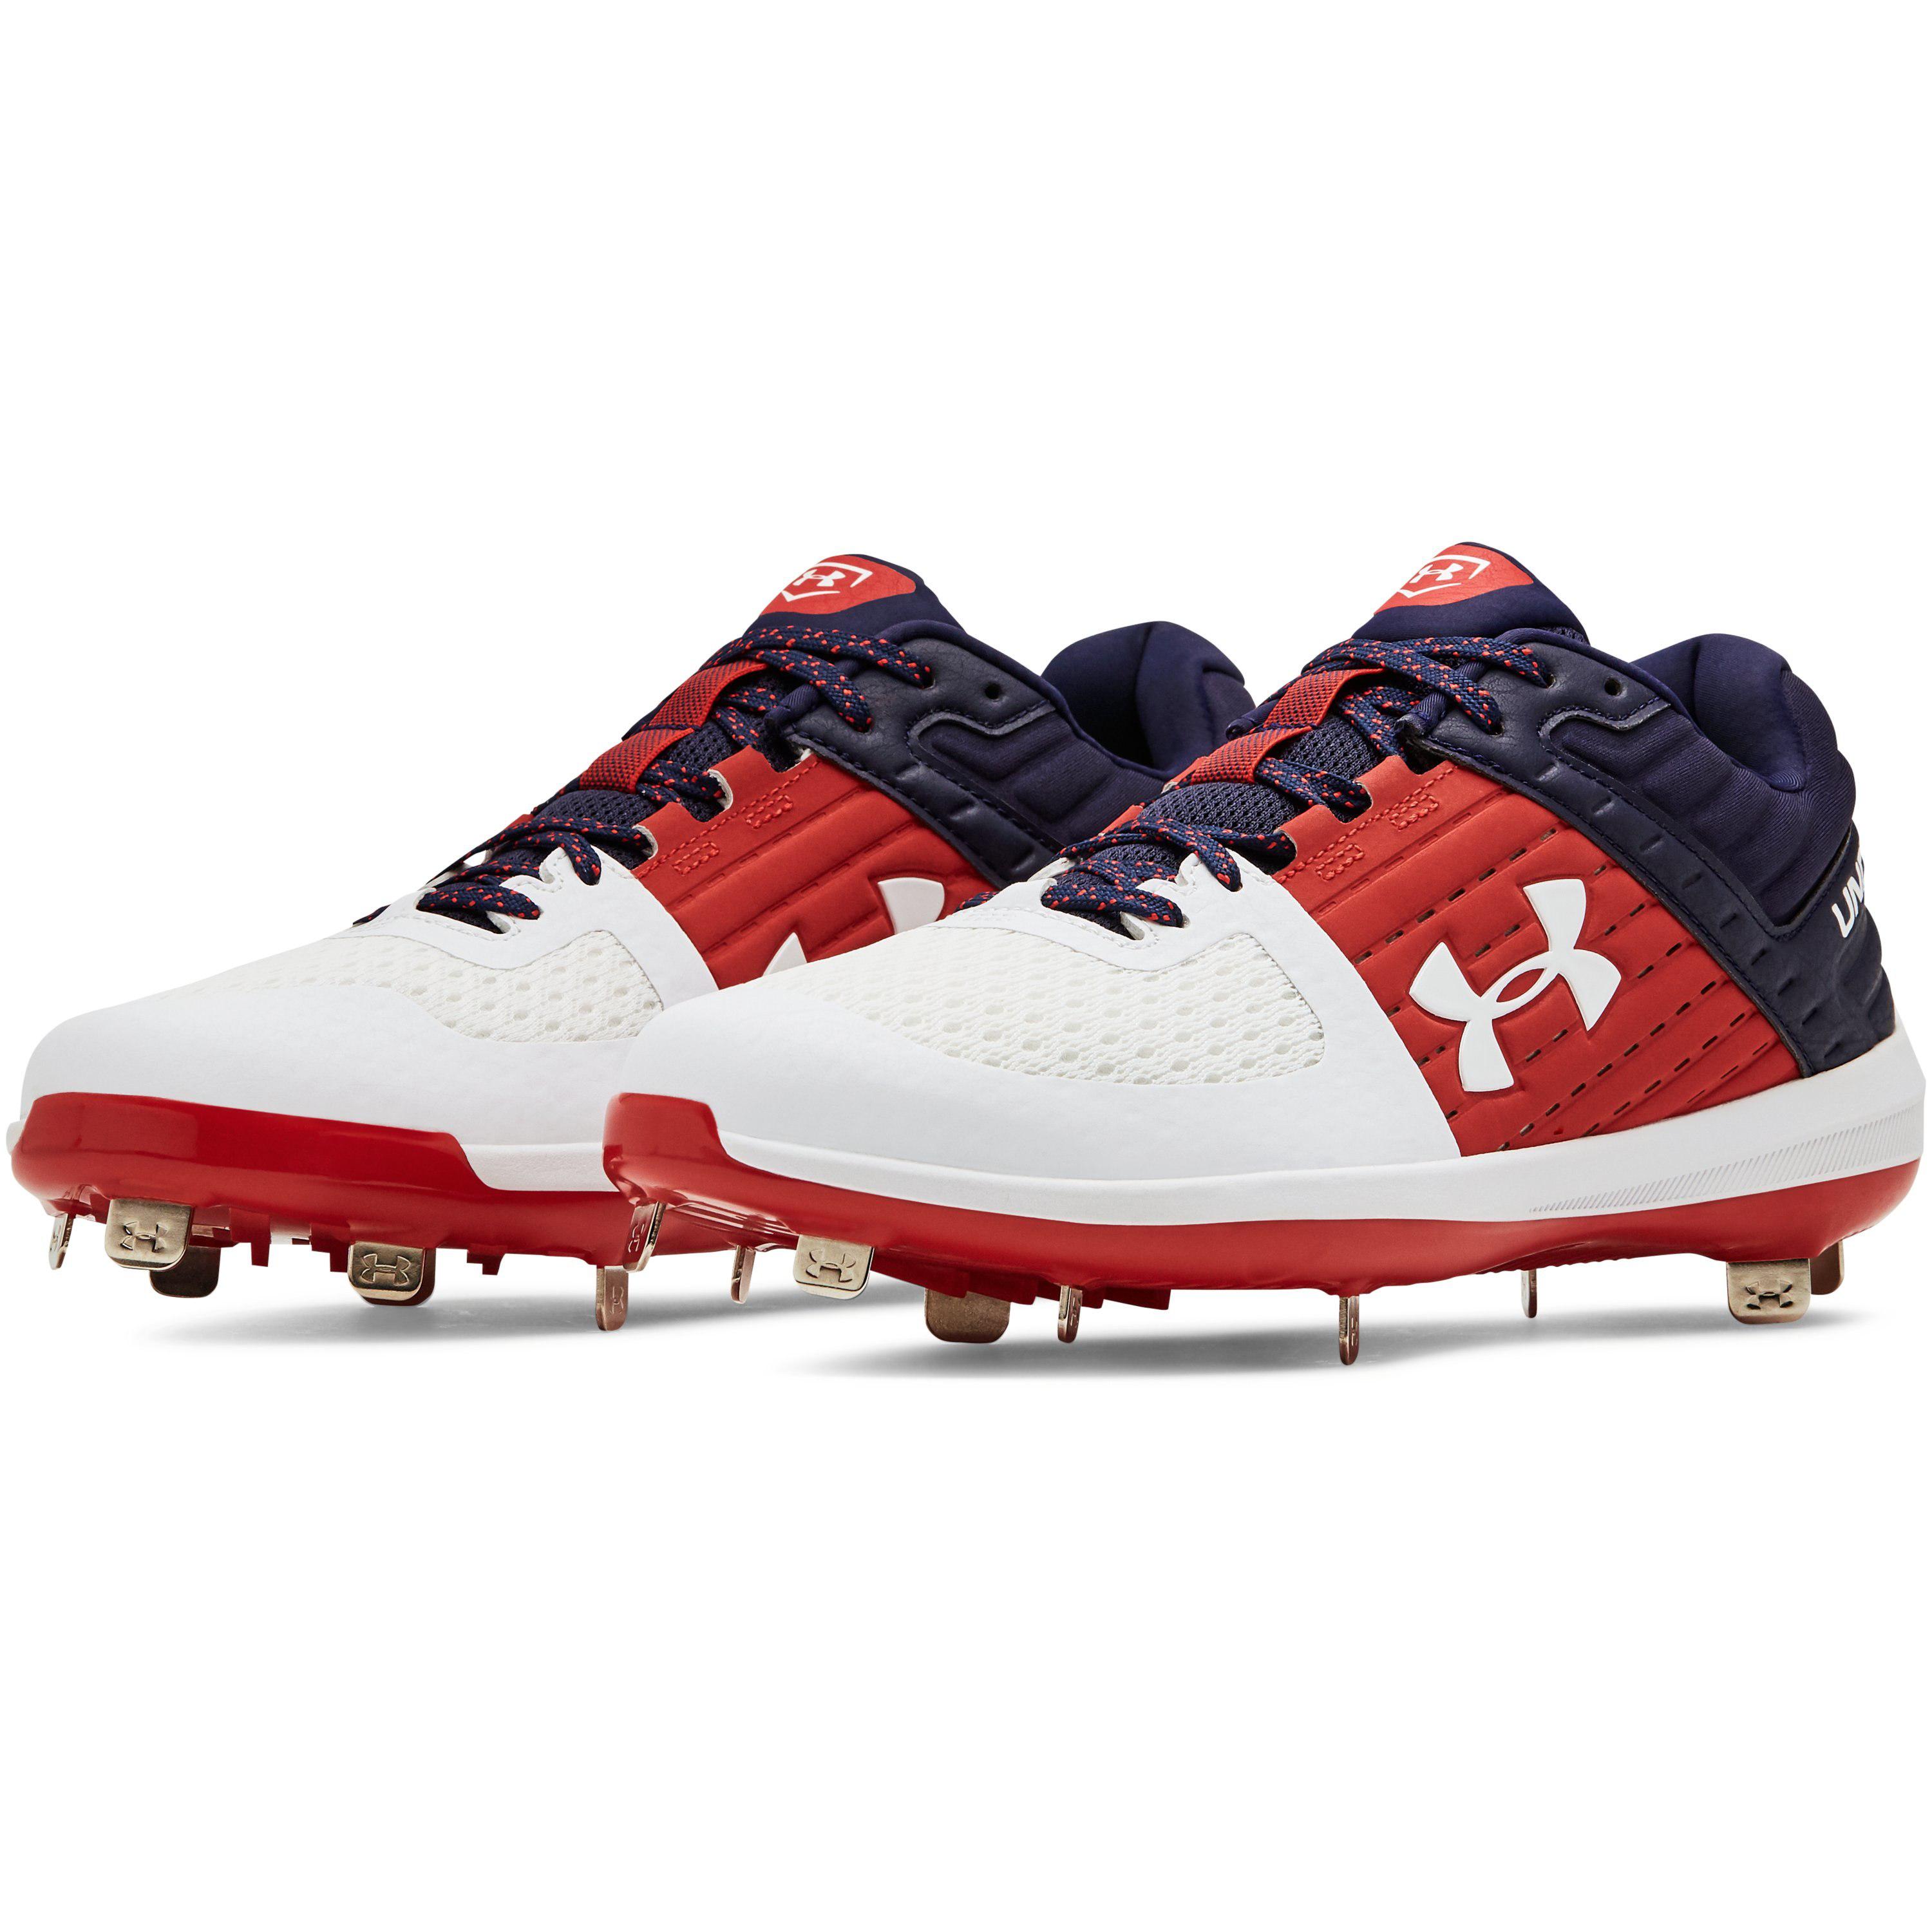 Choose Sz/color Under Armour 1240652 Mens UA Yard Mid St Baseball Cleats for sale online 